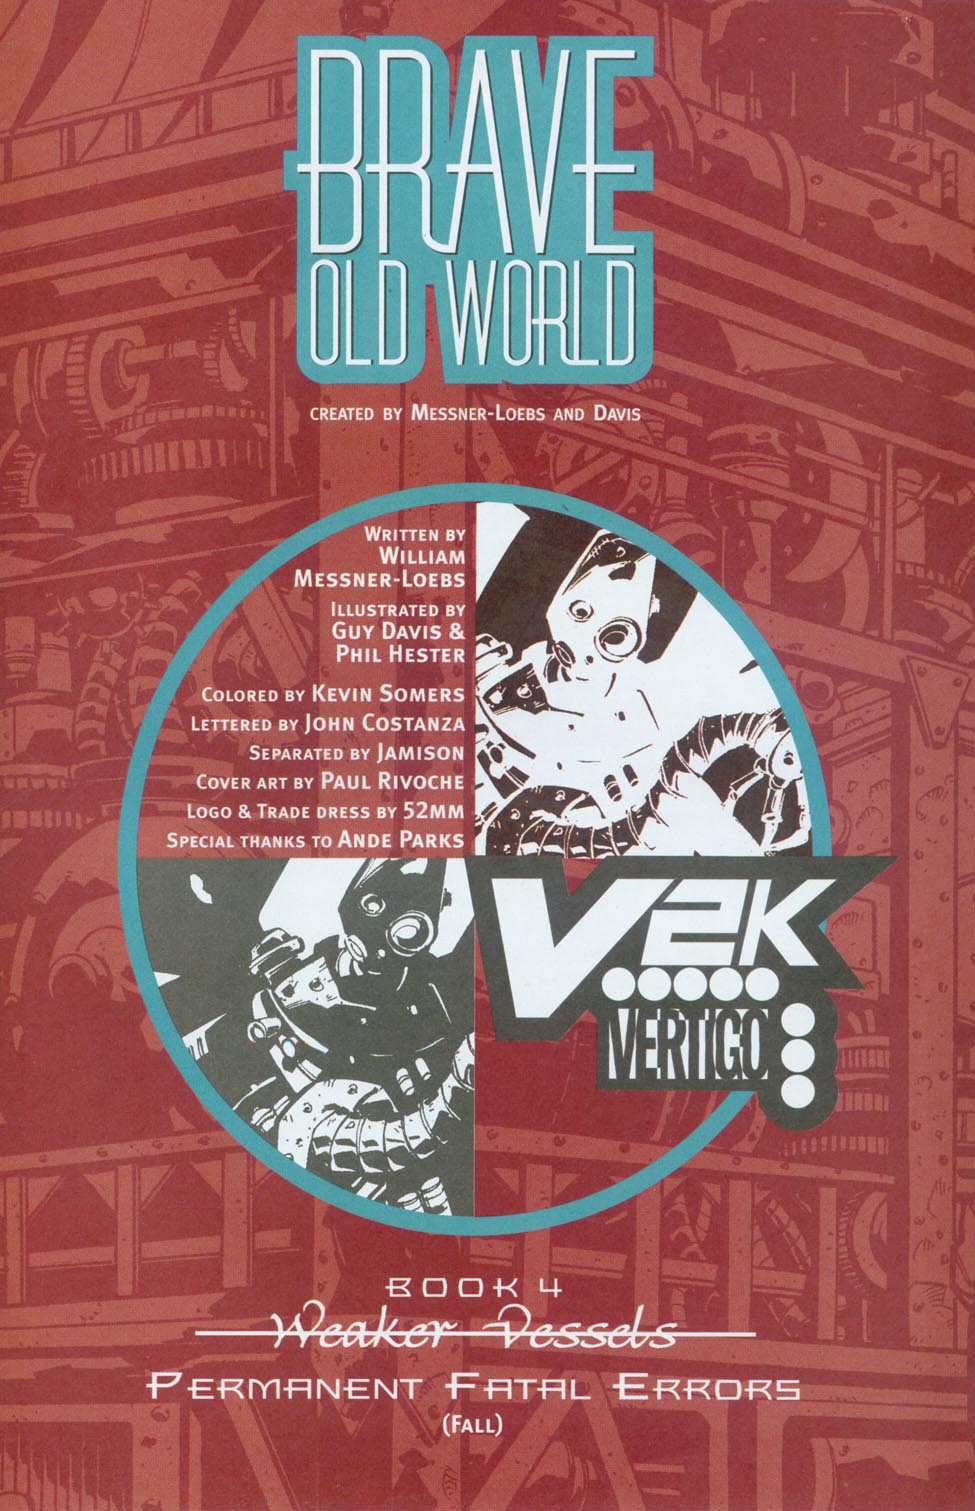 Read online Brave Old World comic -  Issue #4 - 2